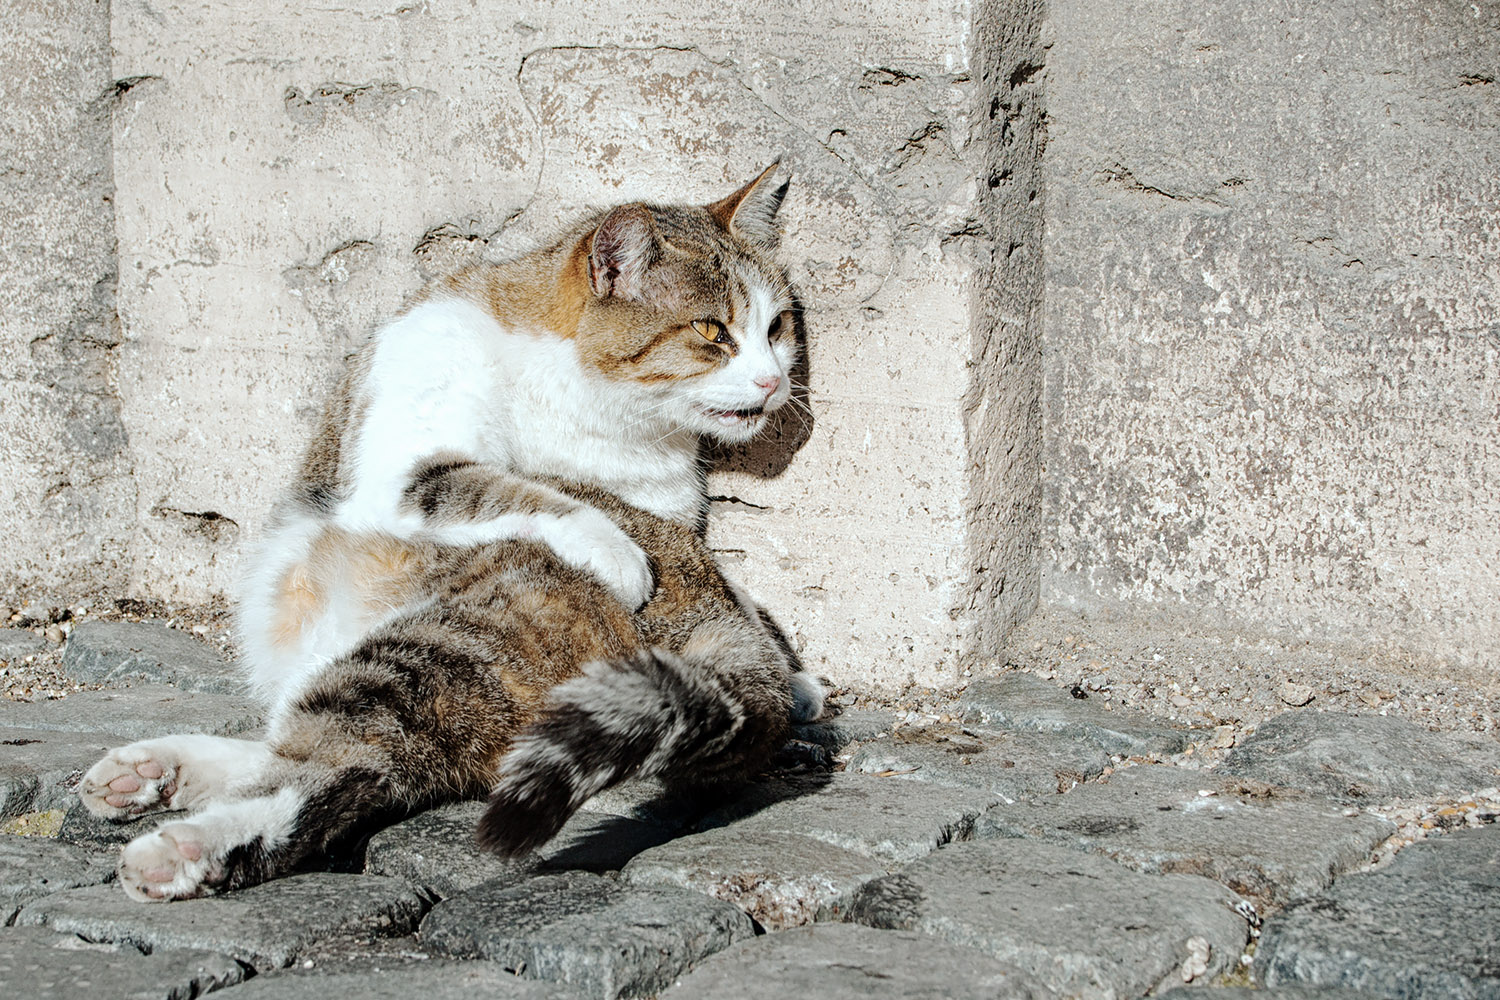 It looks like it has been a rough day for this cat from Rome